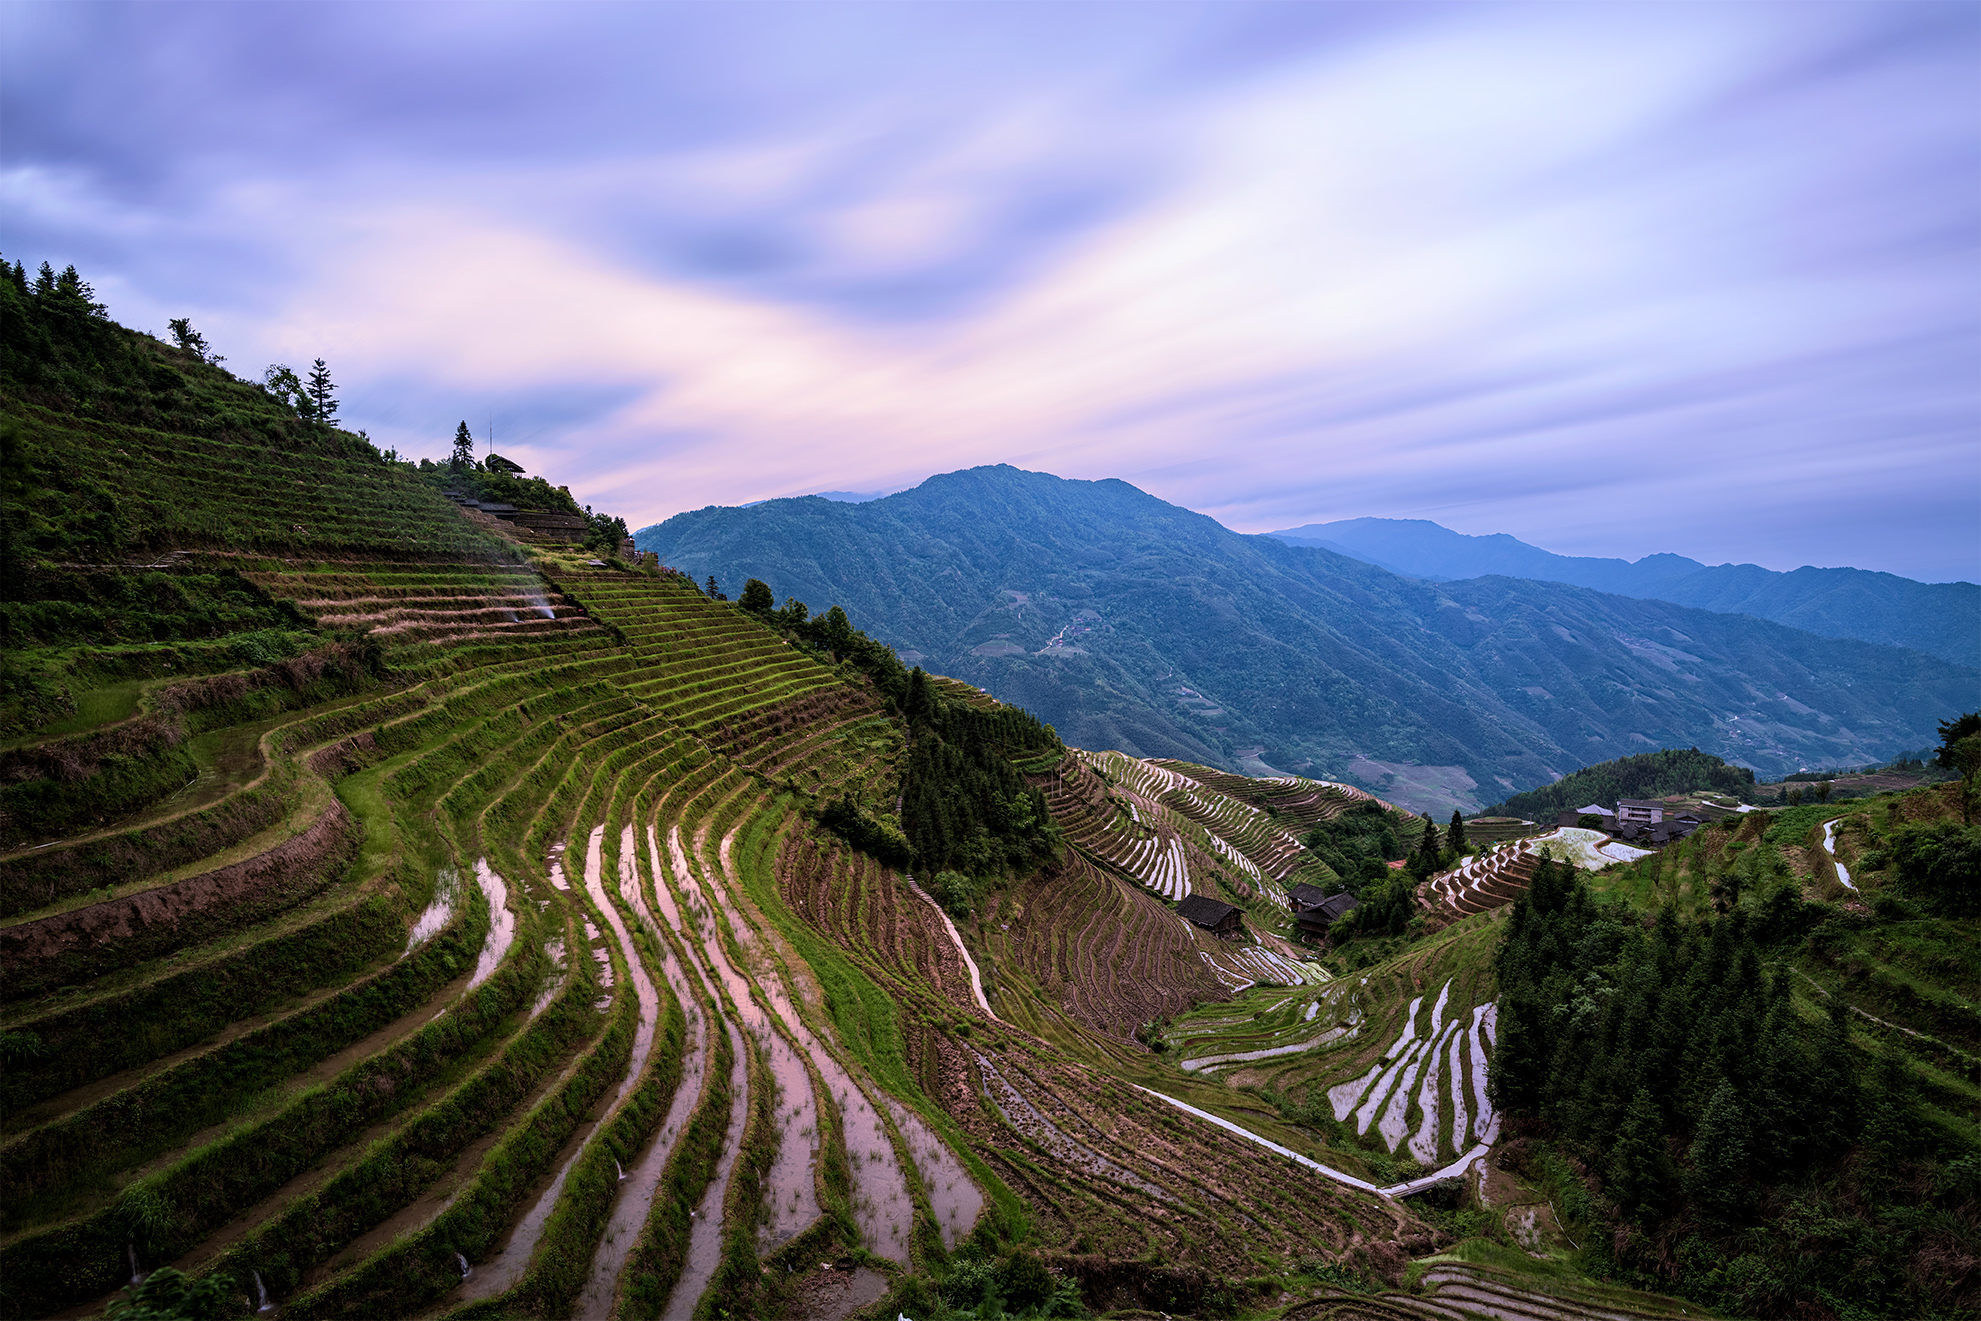 early evening clouds drift over the slopes of the Longji rice terrace mountains